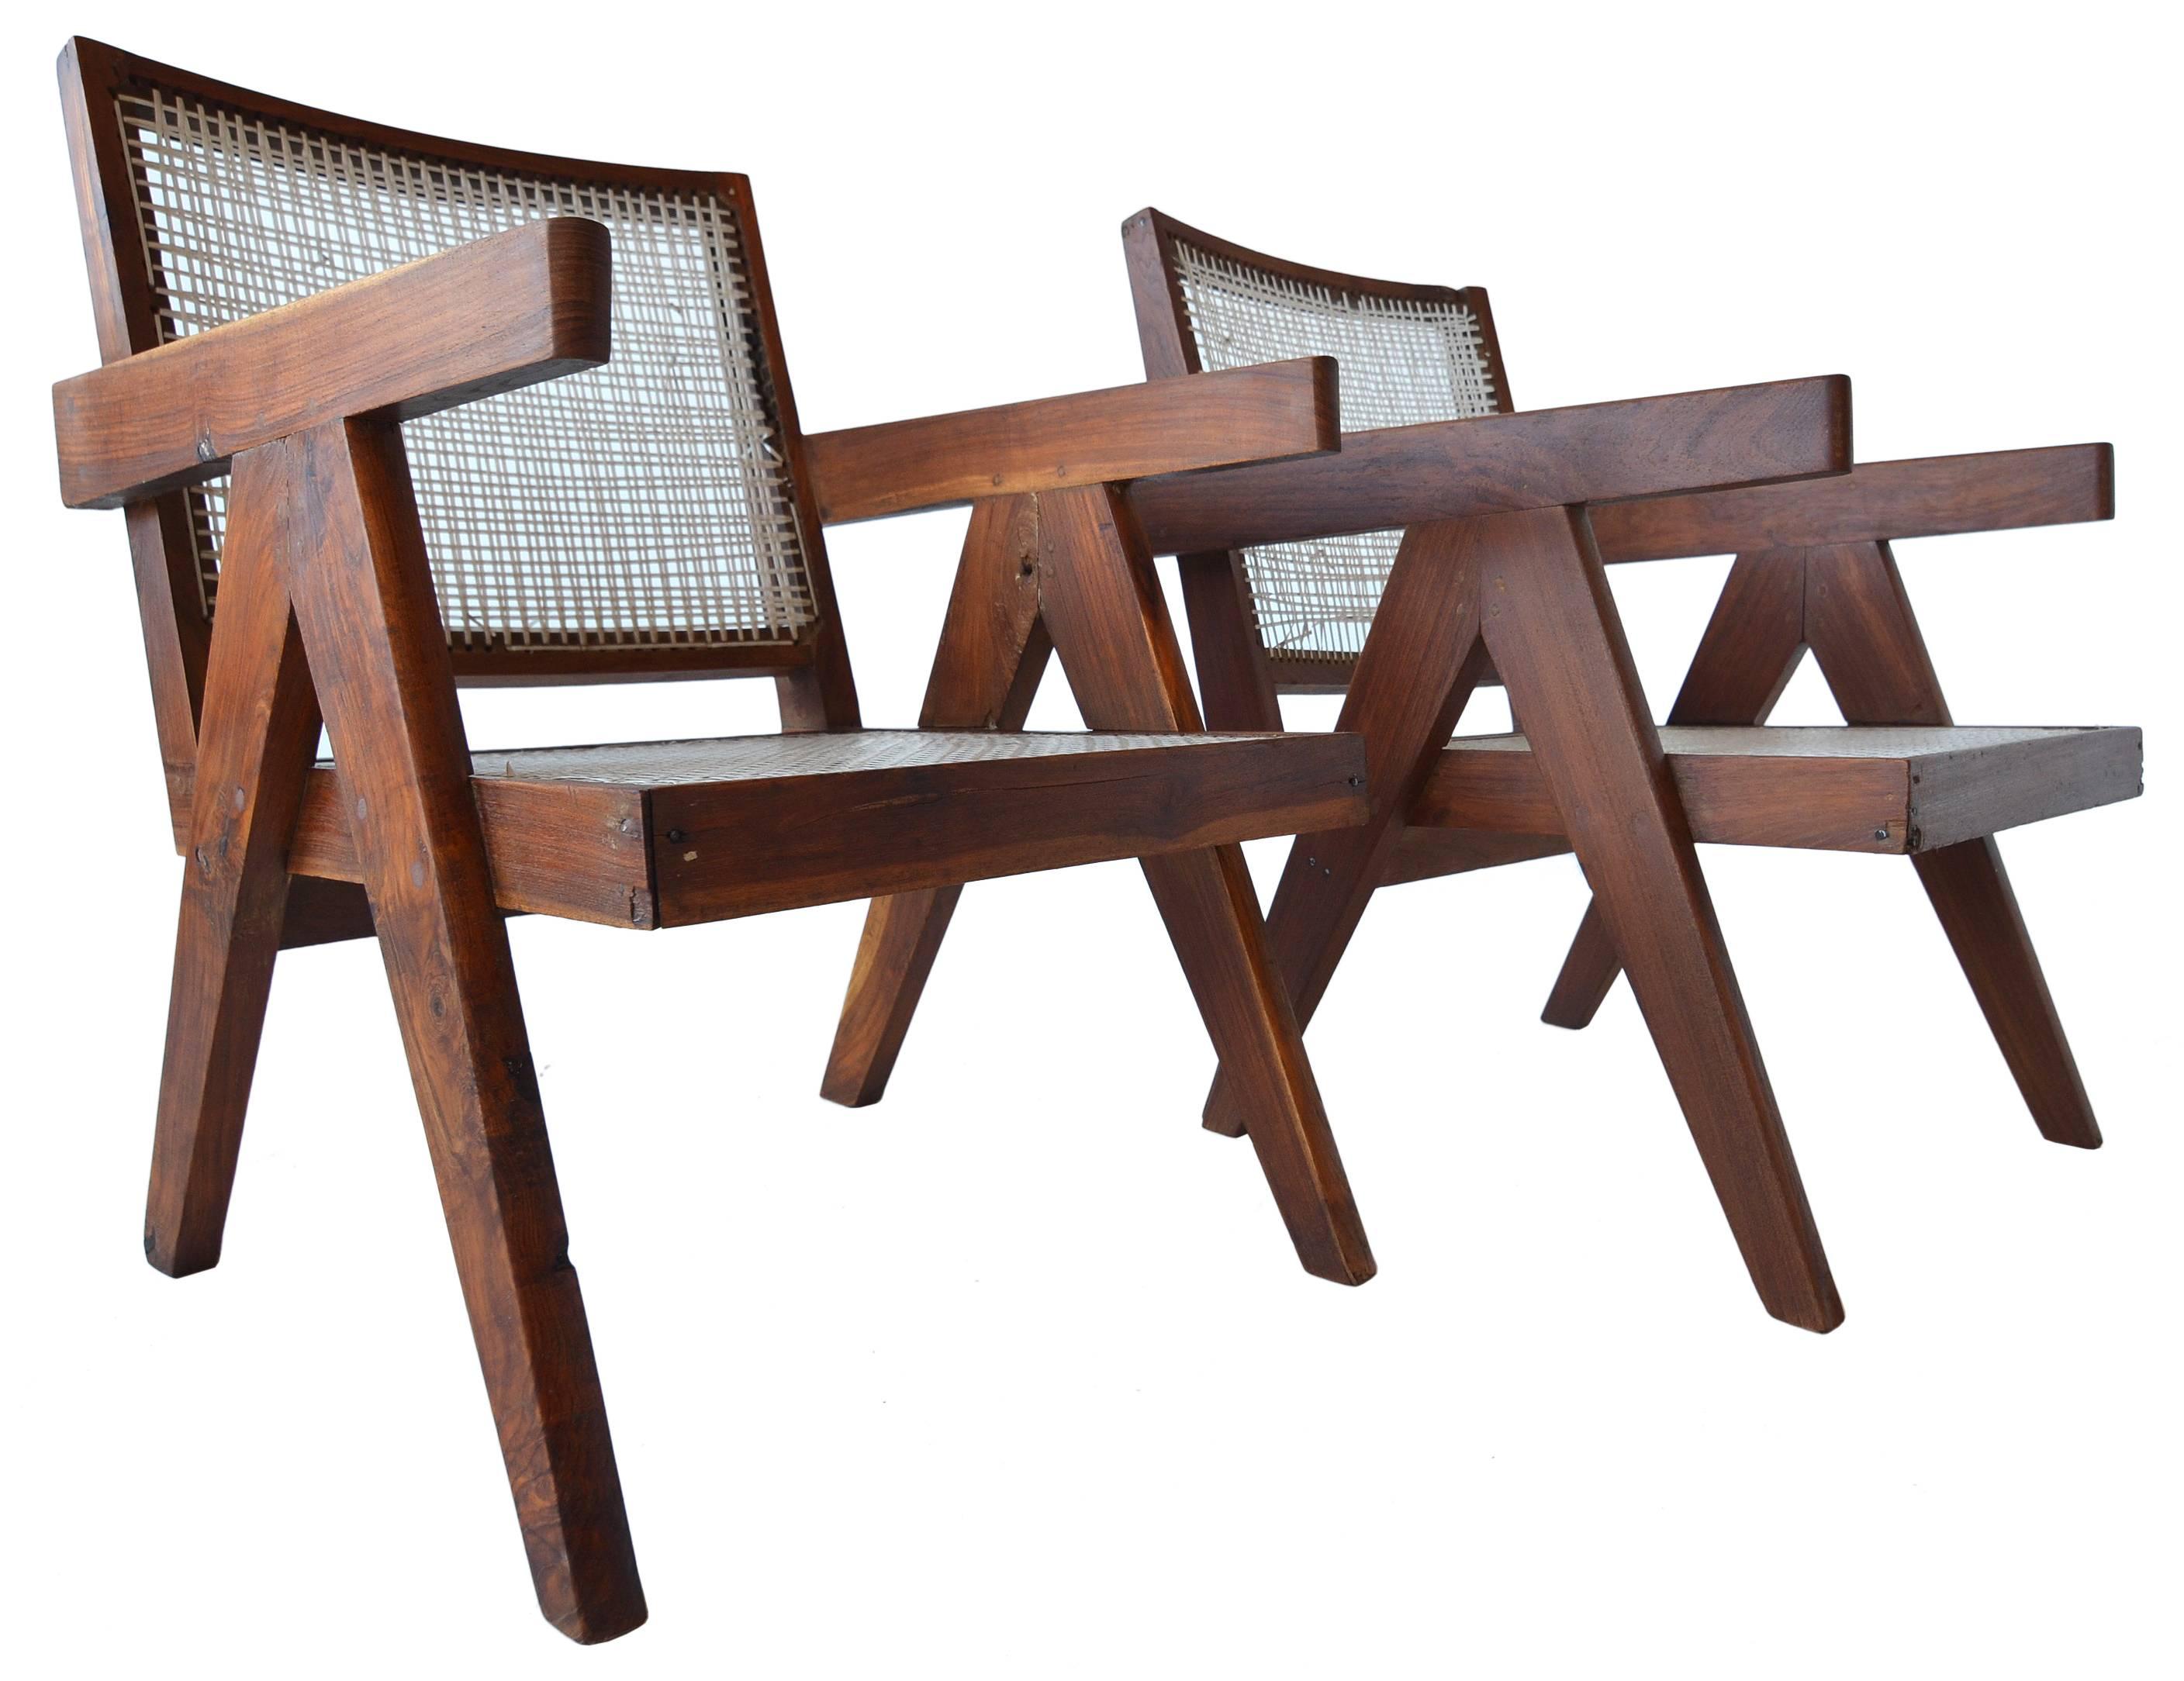 A great pair of easy chairs by Pierre Jeanneret for the Chandigarh Project.

This pair is lightly and sympathetically renovated. A simple cleaning and waxing was performed to bring out the color and grain of the wood. 

These two chairs retain the